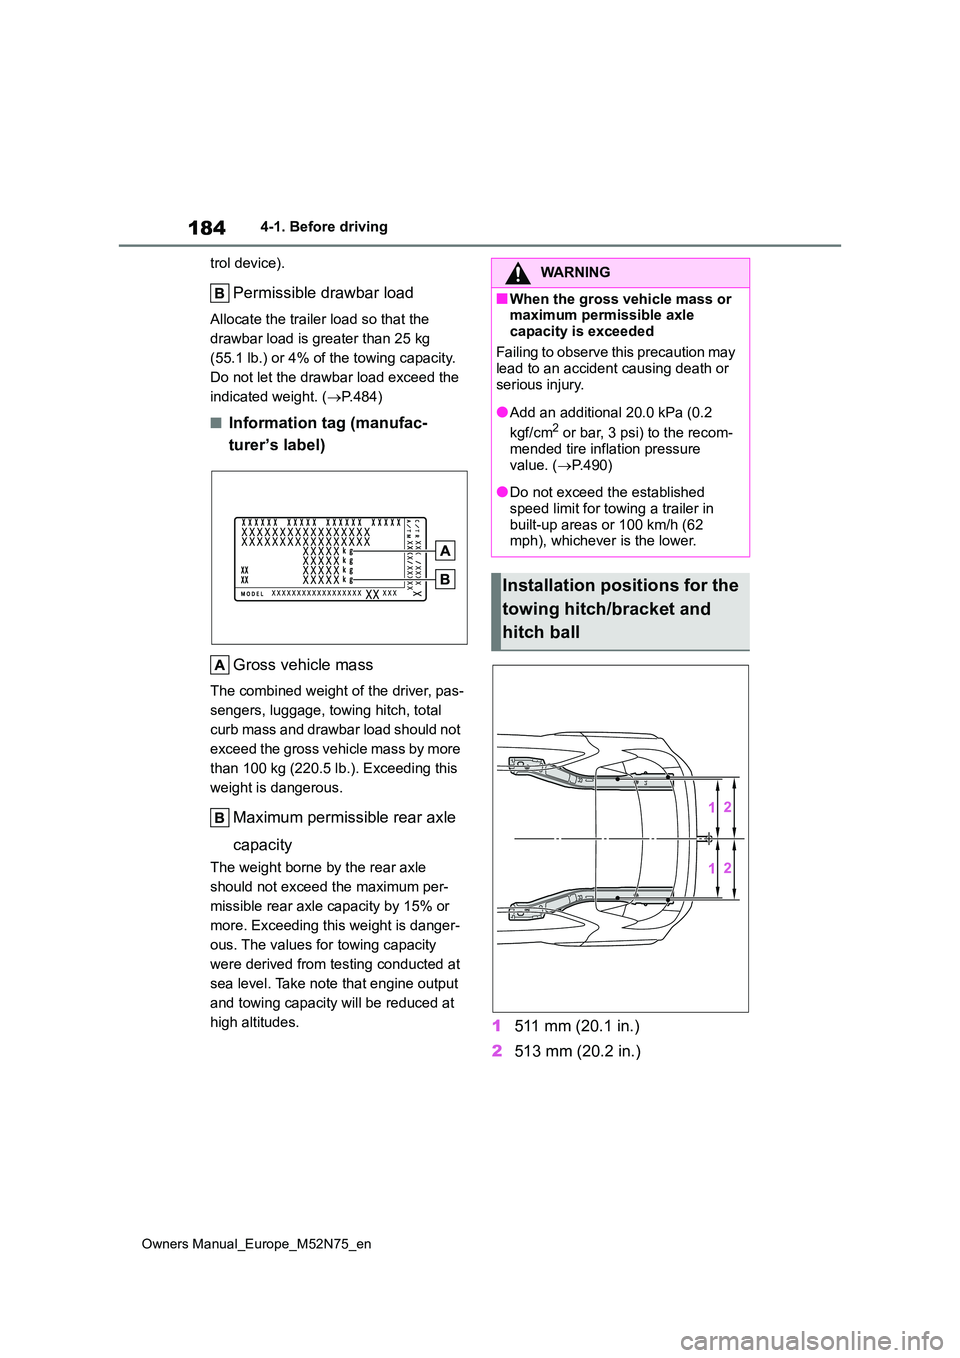 TOYOTA YARIS CROSS 2023  Owners Manual 184
Owners Manual_Europe_M52N75_en
4-1. Before driving 
trol device).
Permissible drawbar load
Allocate the trailer load so that the  
drawbar load is greater than 25 kg 
(55.1 lb.) or 4% of the towin